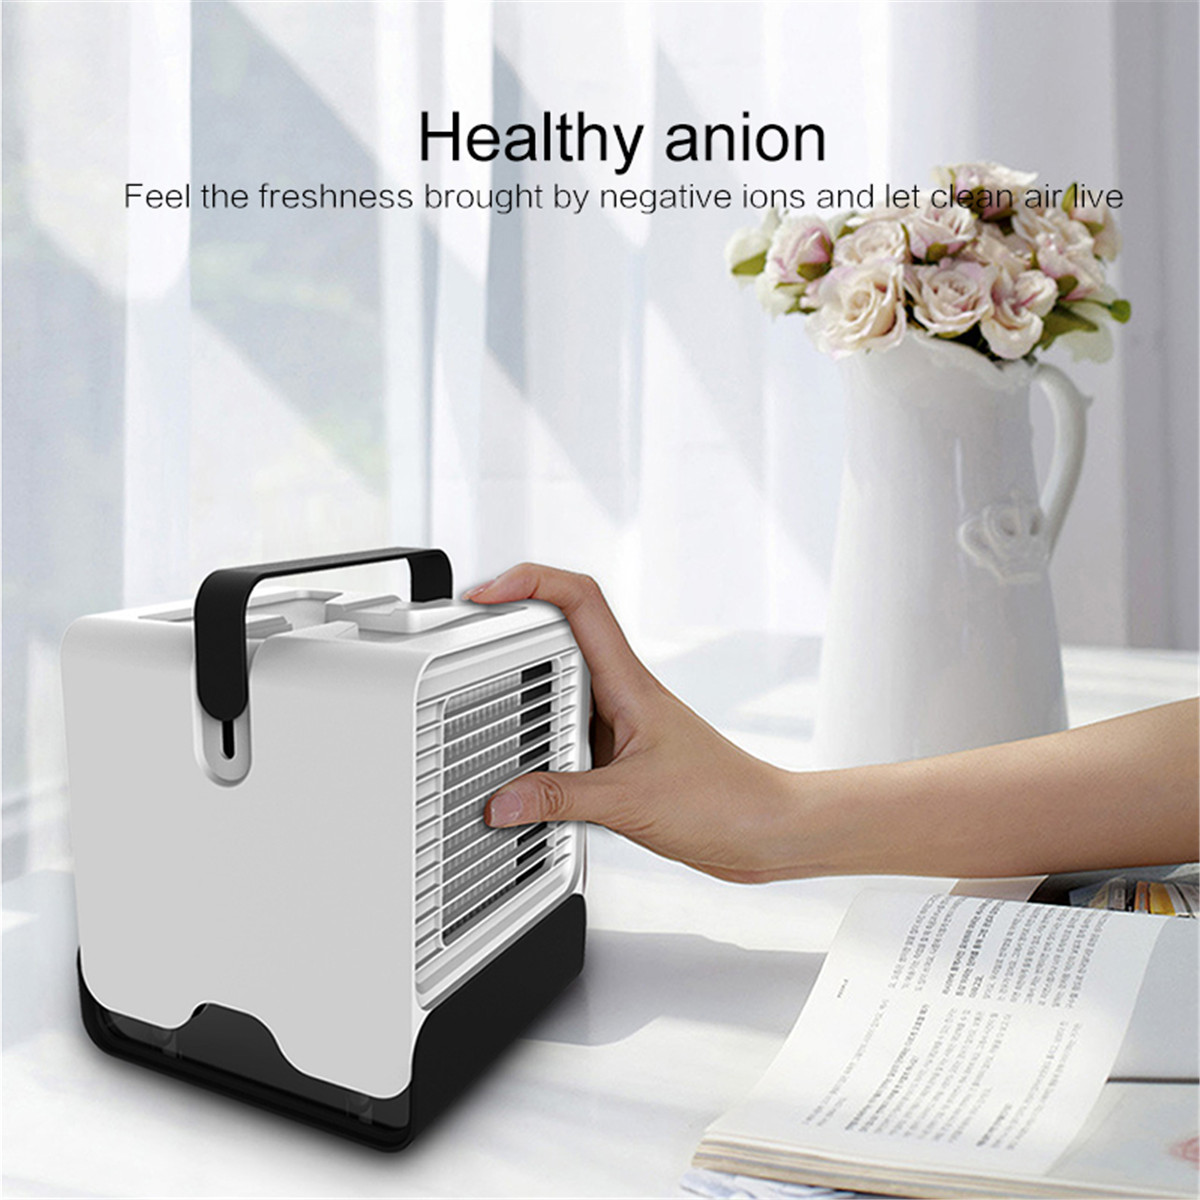 Mini-Portable-Air-Conditioner-Night-Light-Conditioning-Cooler-Humidifier-Purifier-USB-Desktop-Air-Co-1710195-1